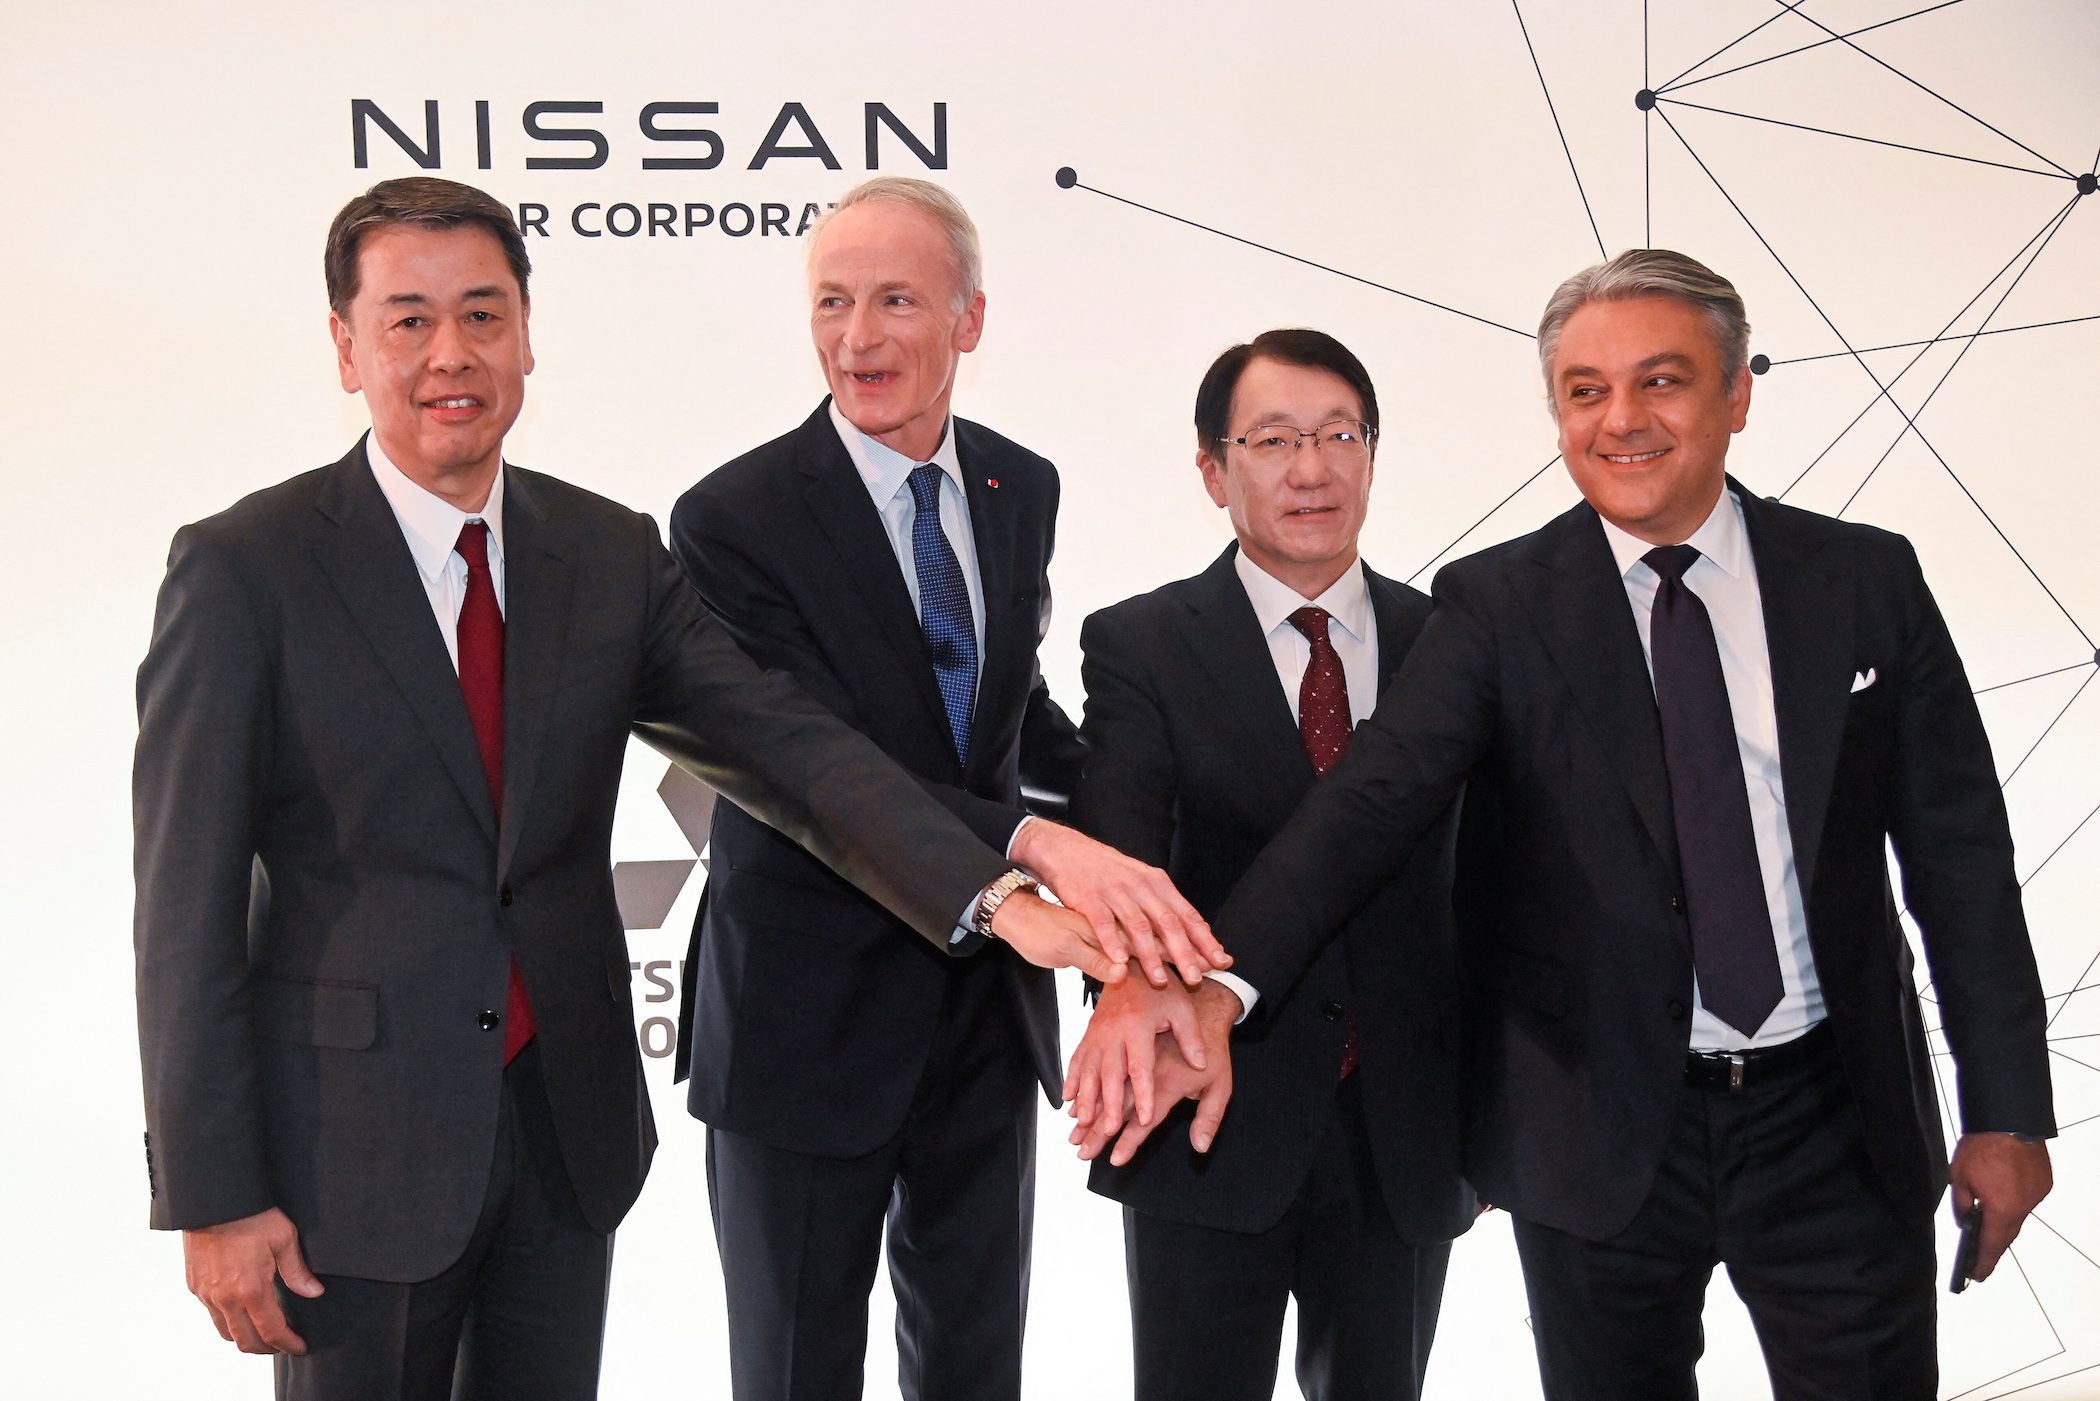 In alliance reboot, Nissan to buy up to 15% stake in Renault EV unit